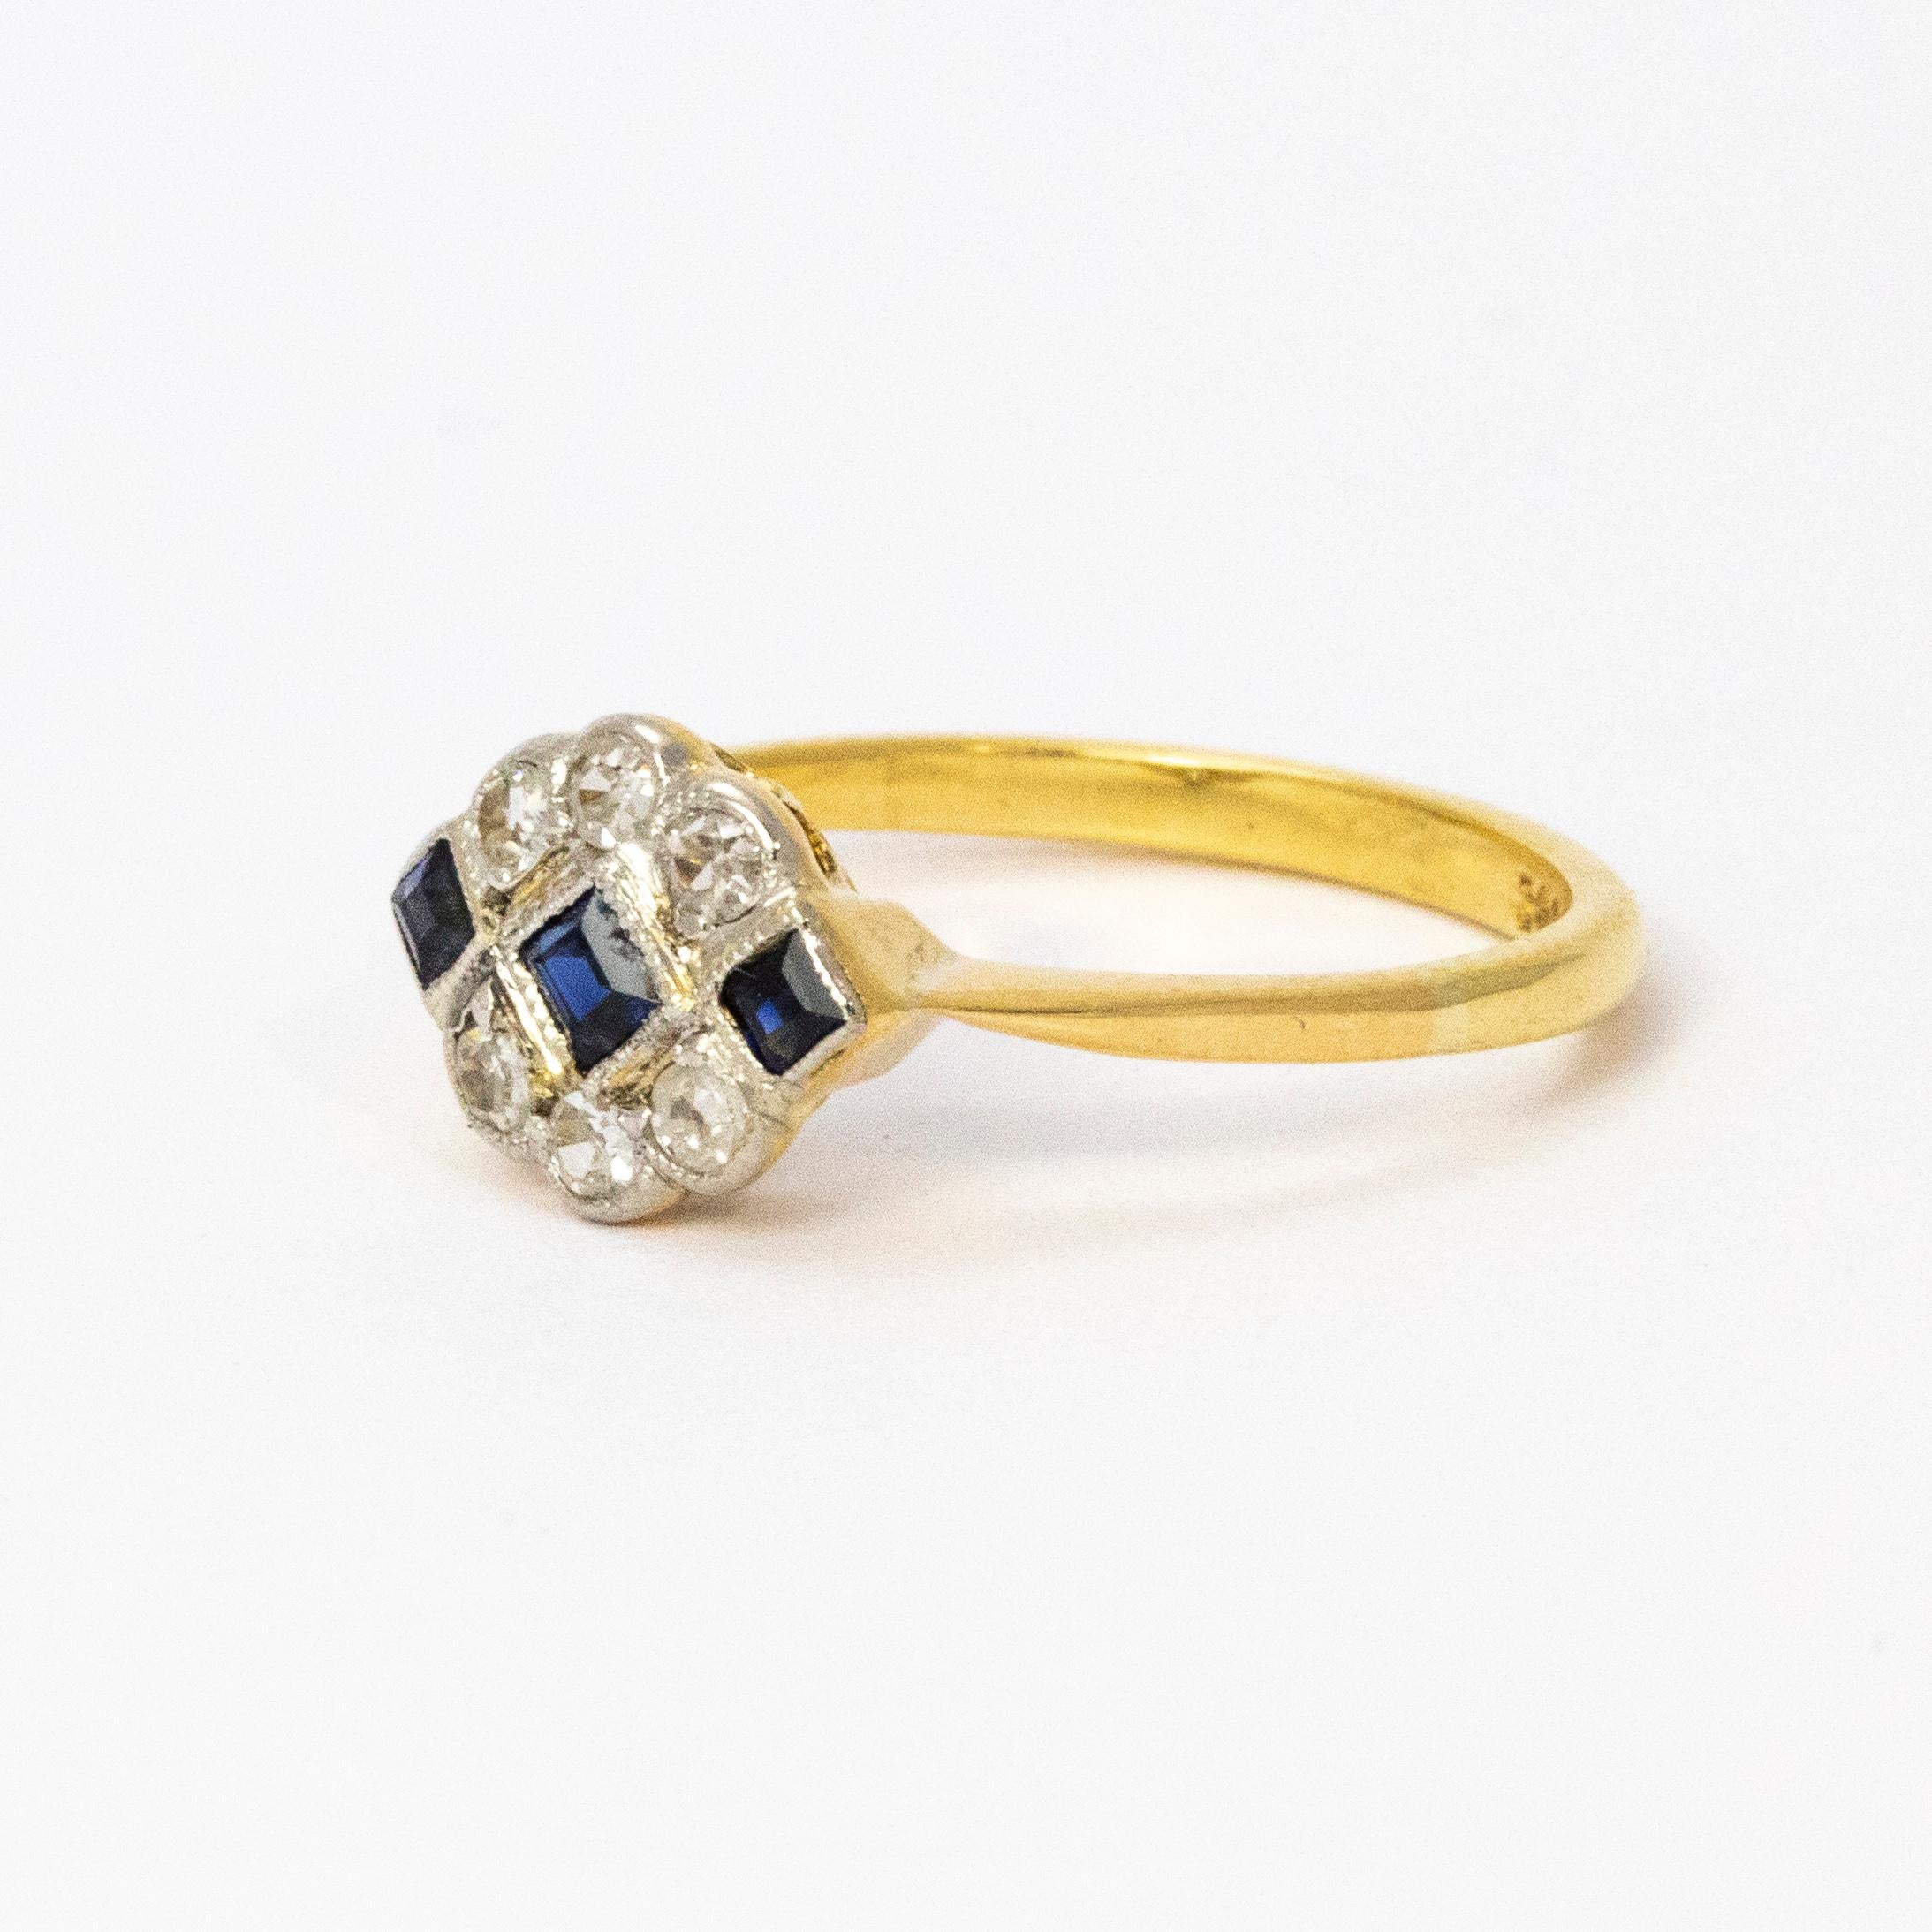 A stunning 1920s Art Deco ring. Centrally set with three brilliant blue square cut sapphires arranged horizontally across the face. Above and below sit curves of six wonderful white diamonds. Modelled in 18 karat yellow gold.

Ring Size: K 1/2 or 5.5